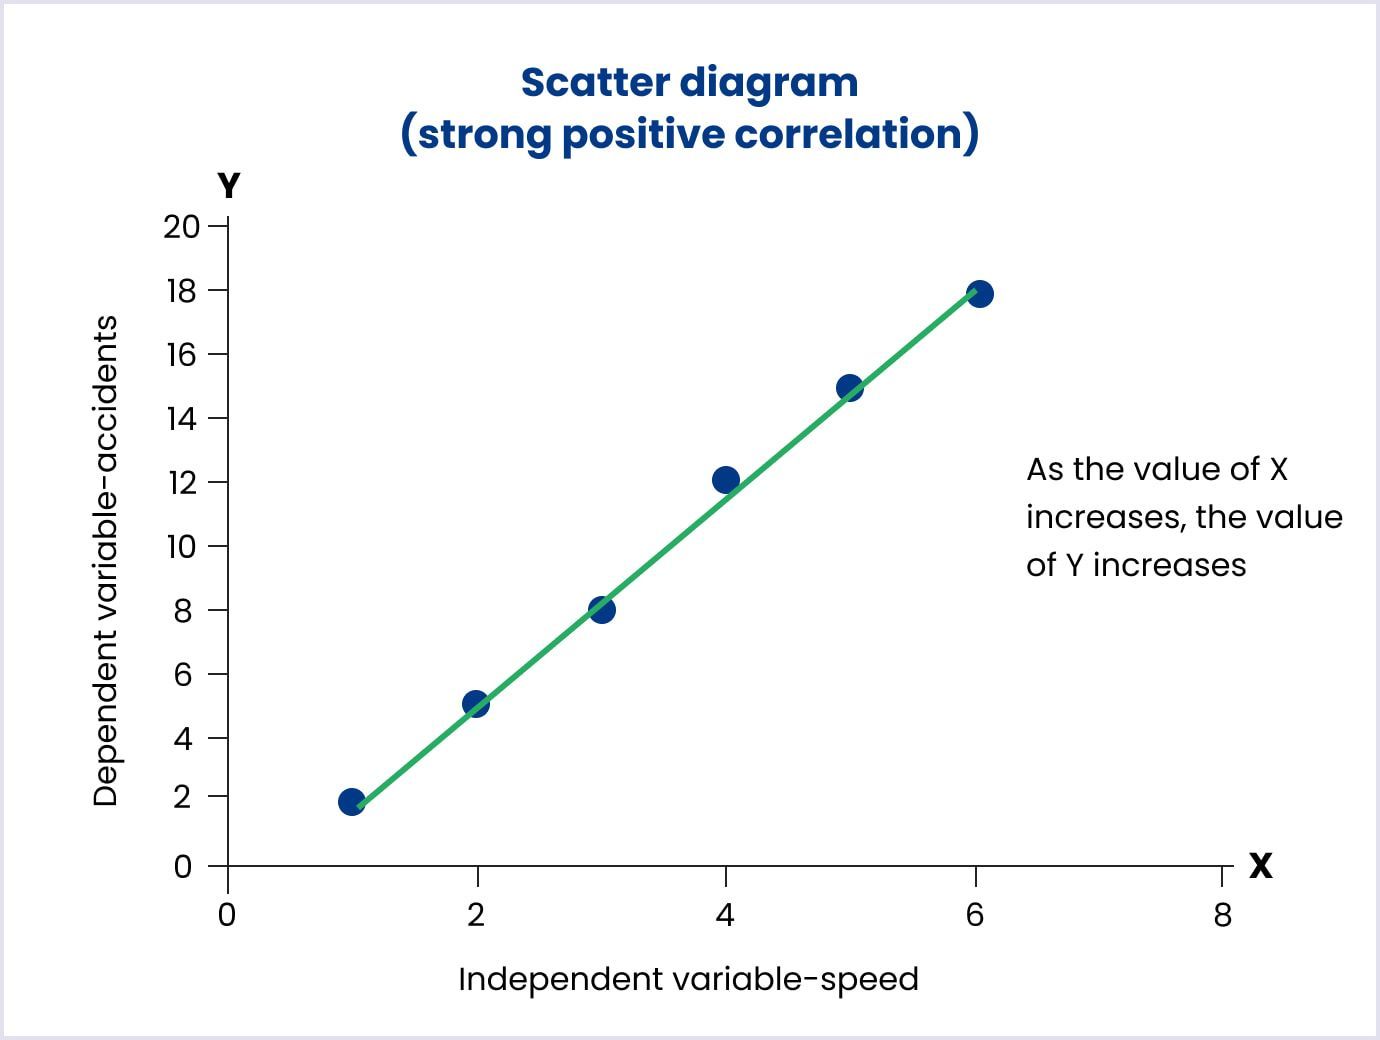 QC tool example: Scatter diagram